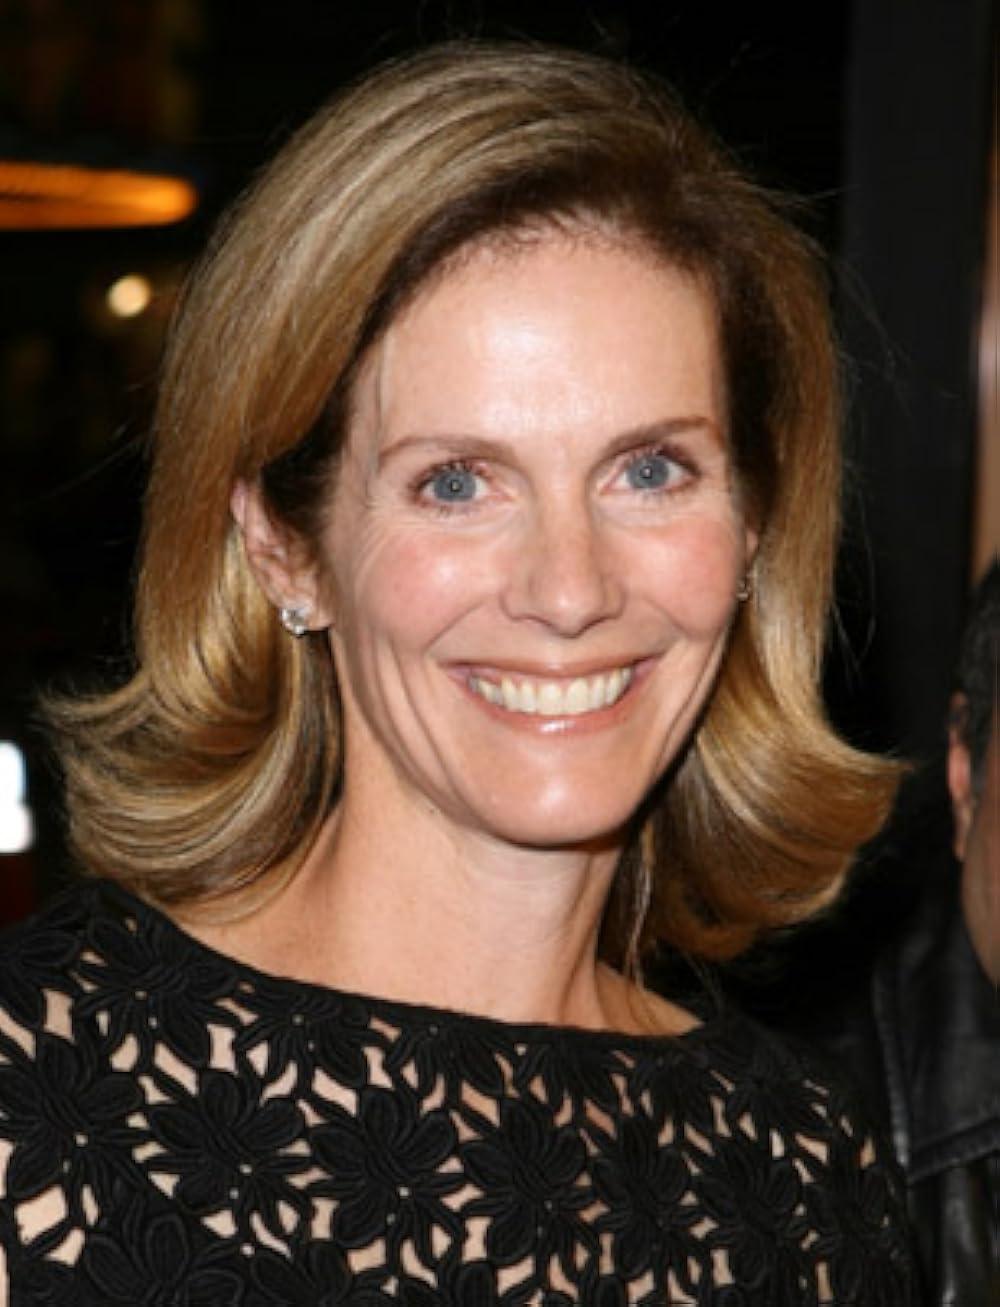 davey mcleod recommends Julie Hagerty Naked